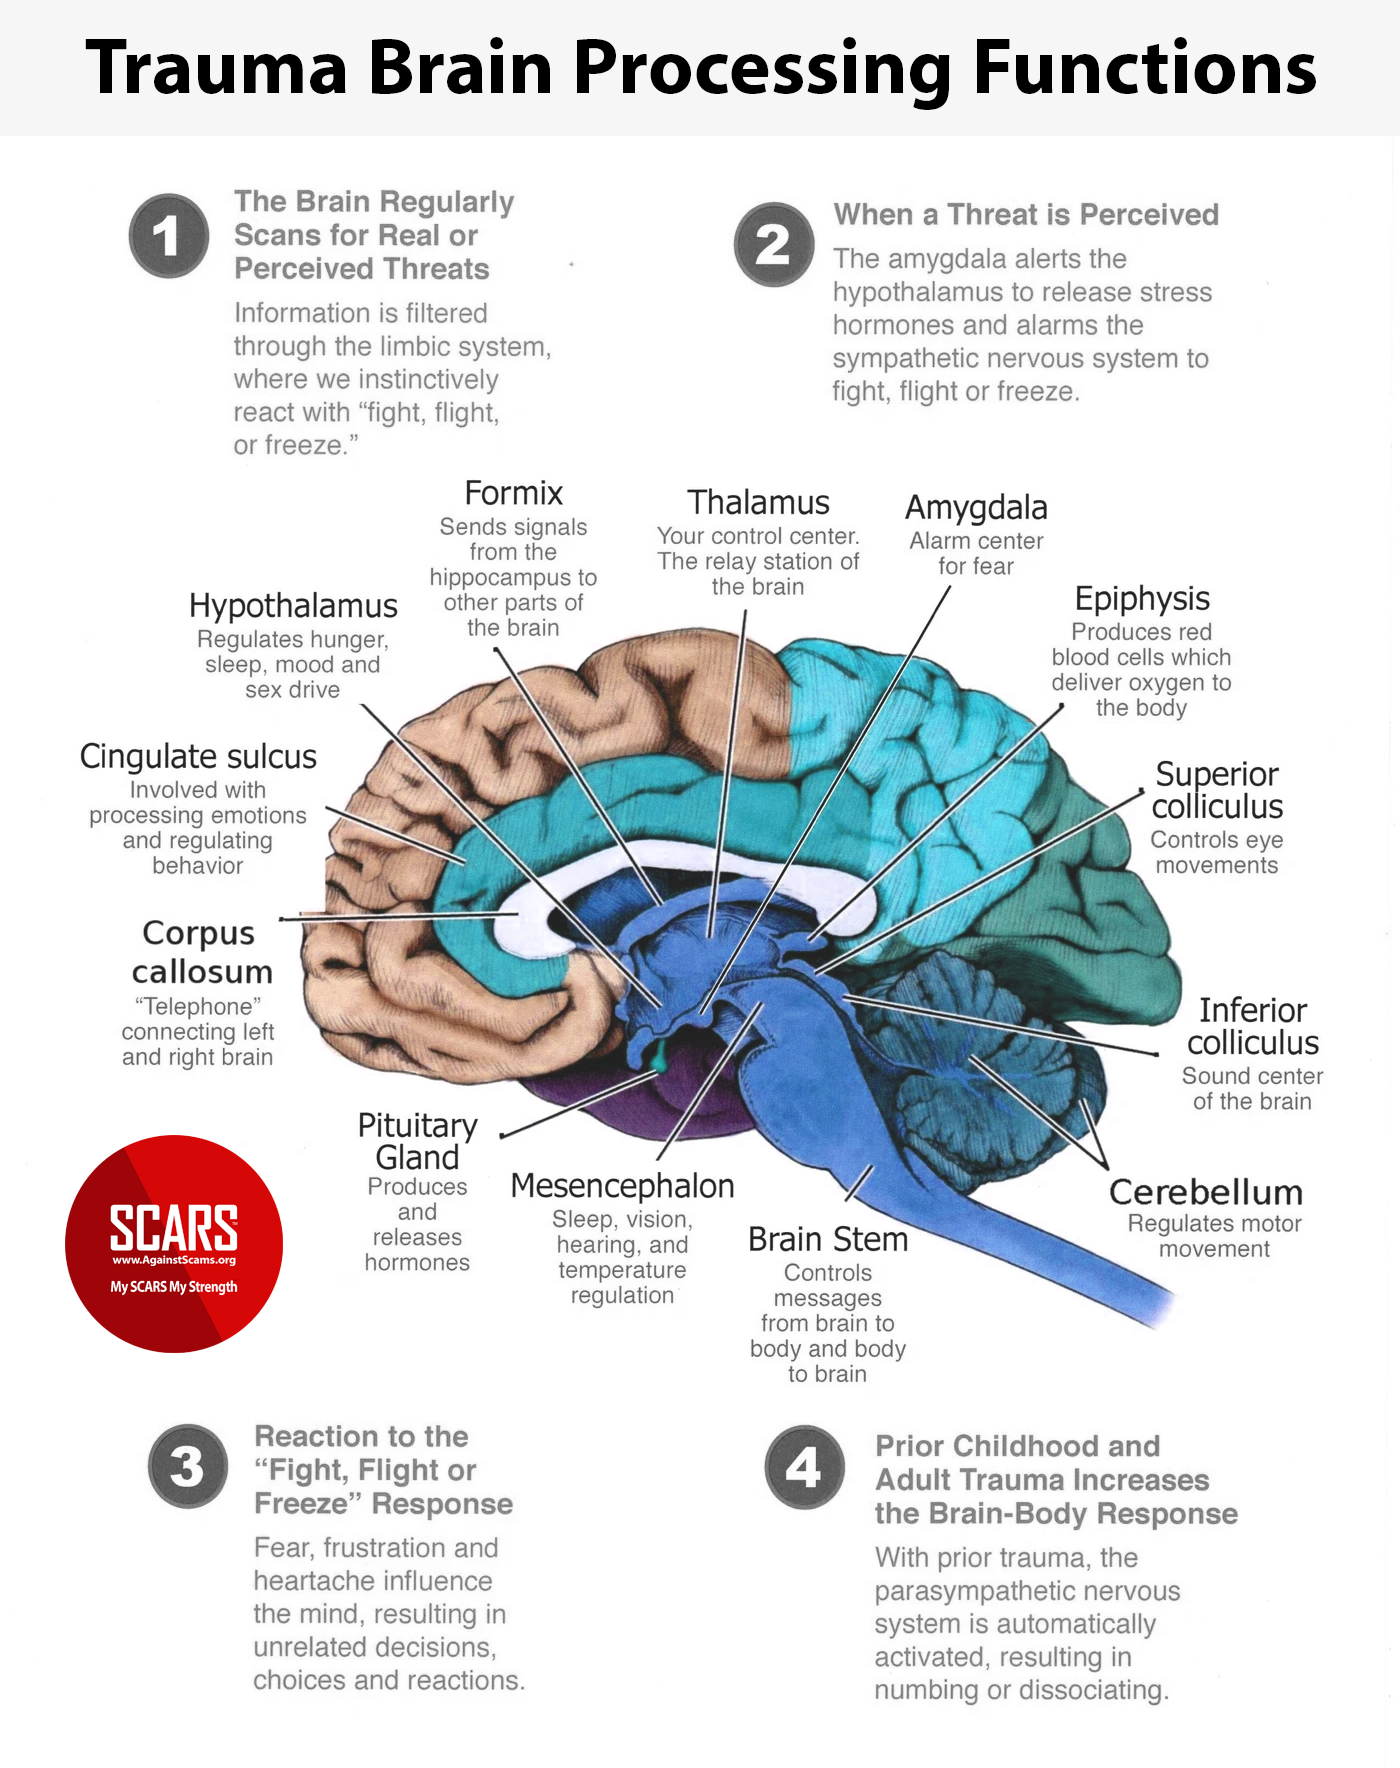 Trauma - Brain Processing Functions - Infographic 22